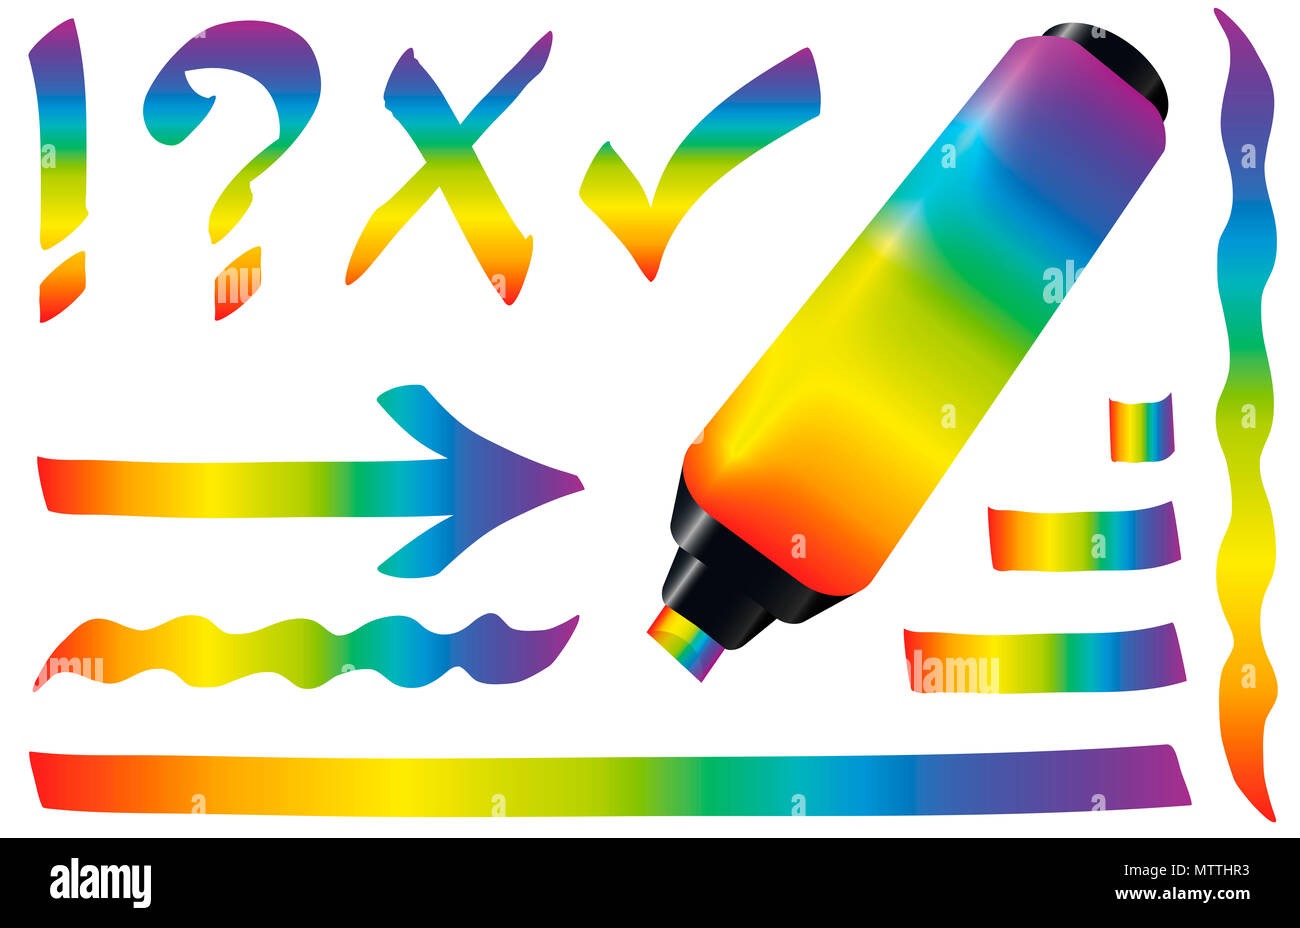 https://c8.alamy.com/comp/MTTHR3/rainbow-colored-highlighter-bright-marker-pen-plus-strokes-multicolored-spectrum-colors-to-bookmark-and-underline-important-text-MTTHR3.jpg